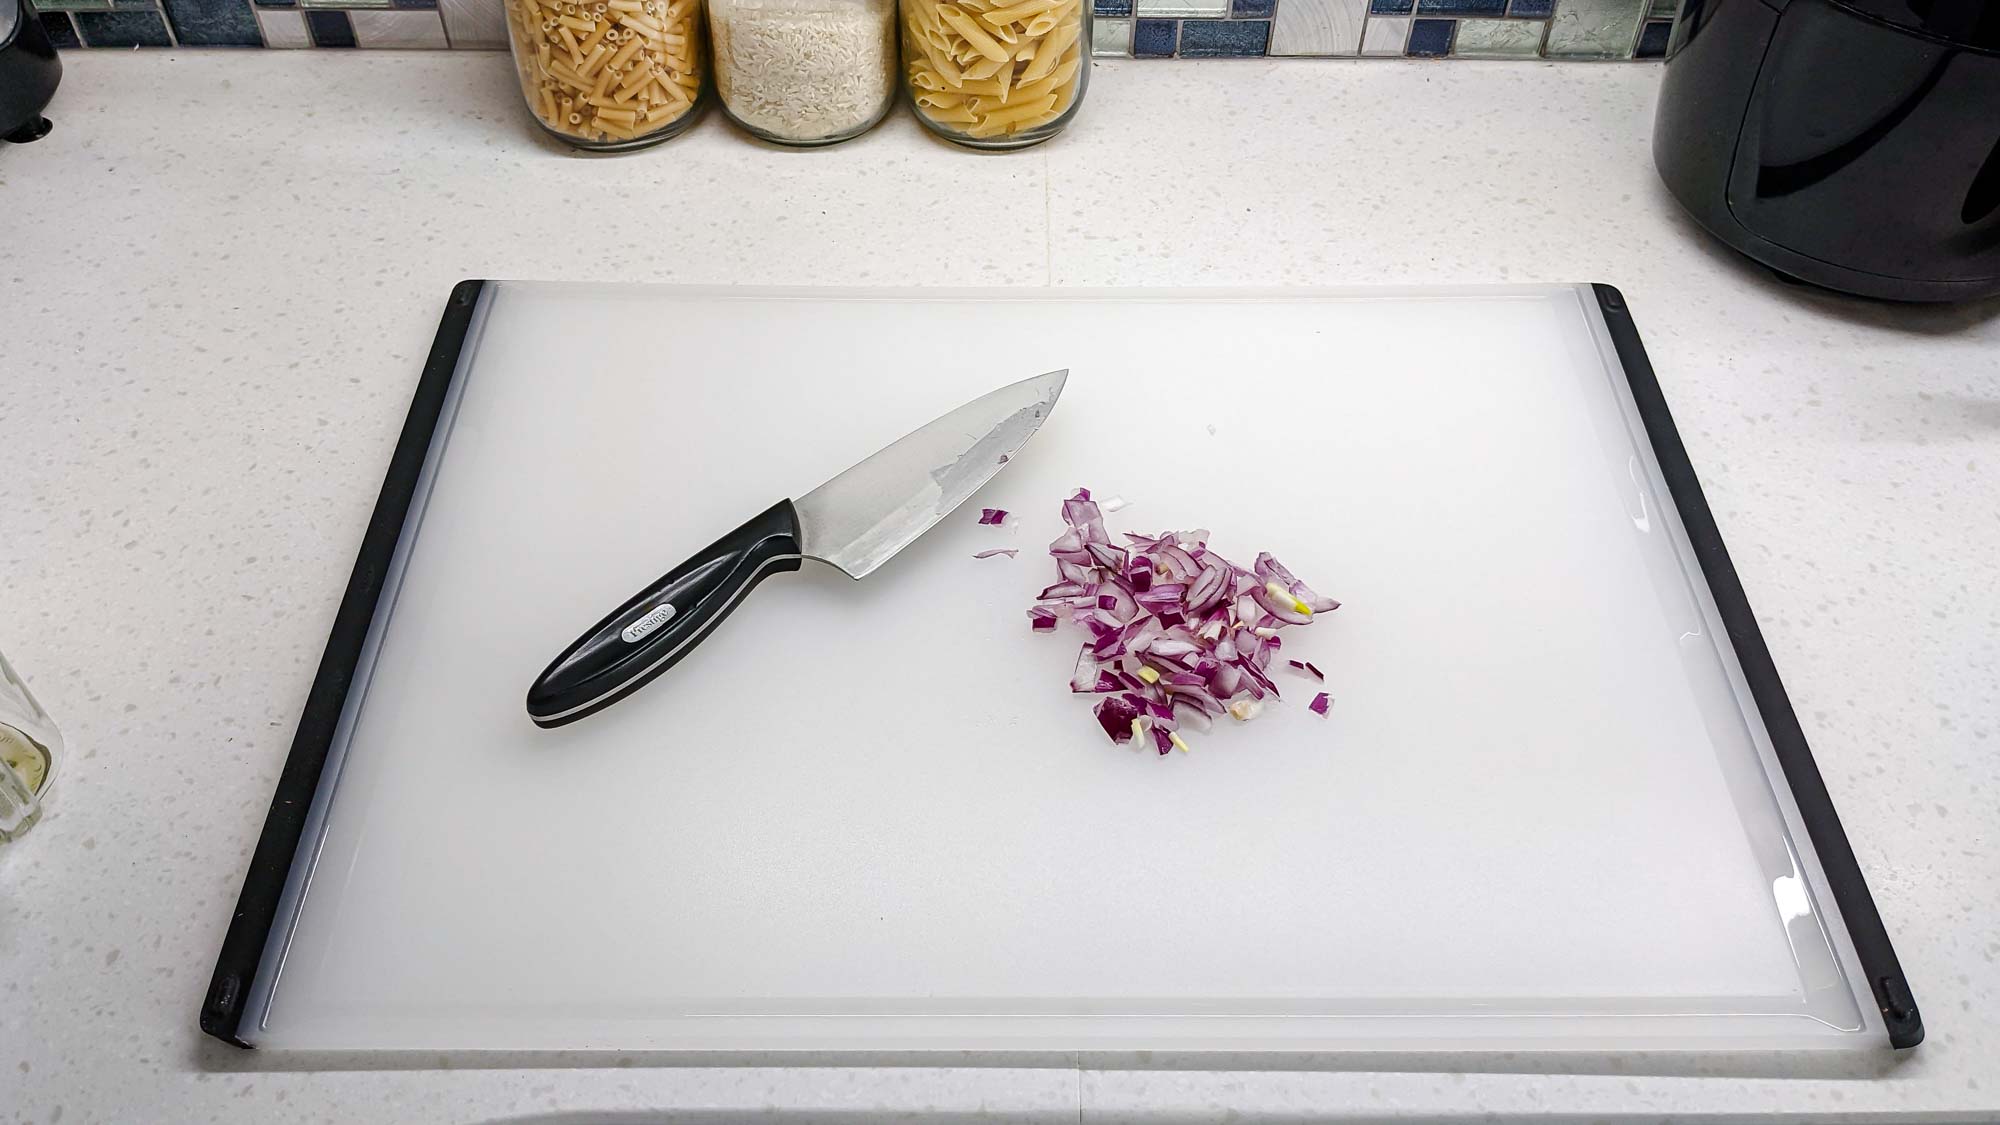 Best cutting boards: OXO Good Grips Carving and Cutting Board